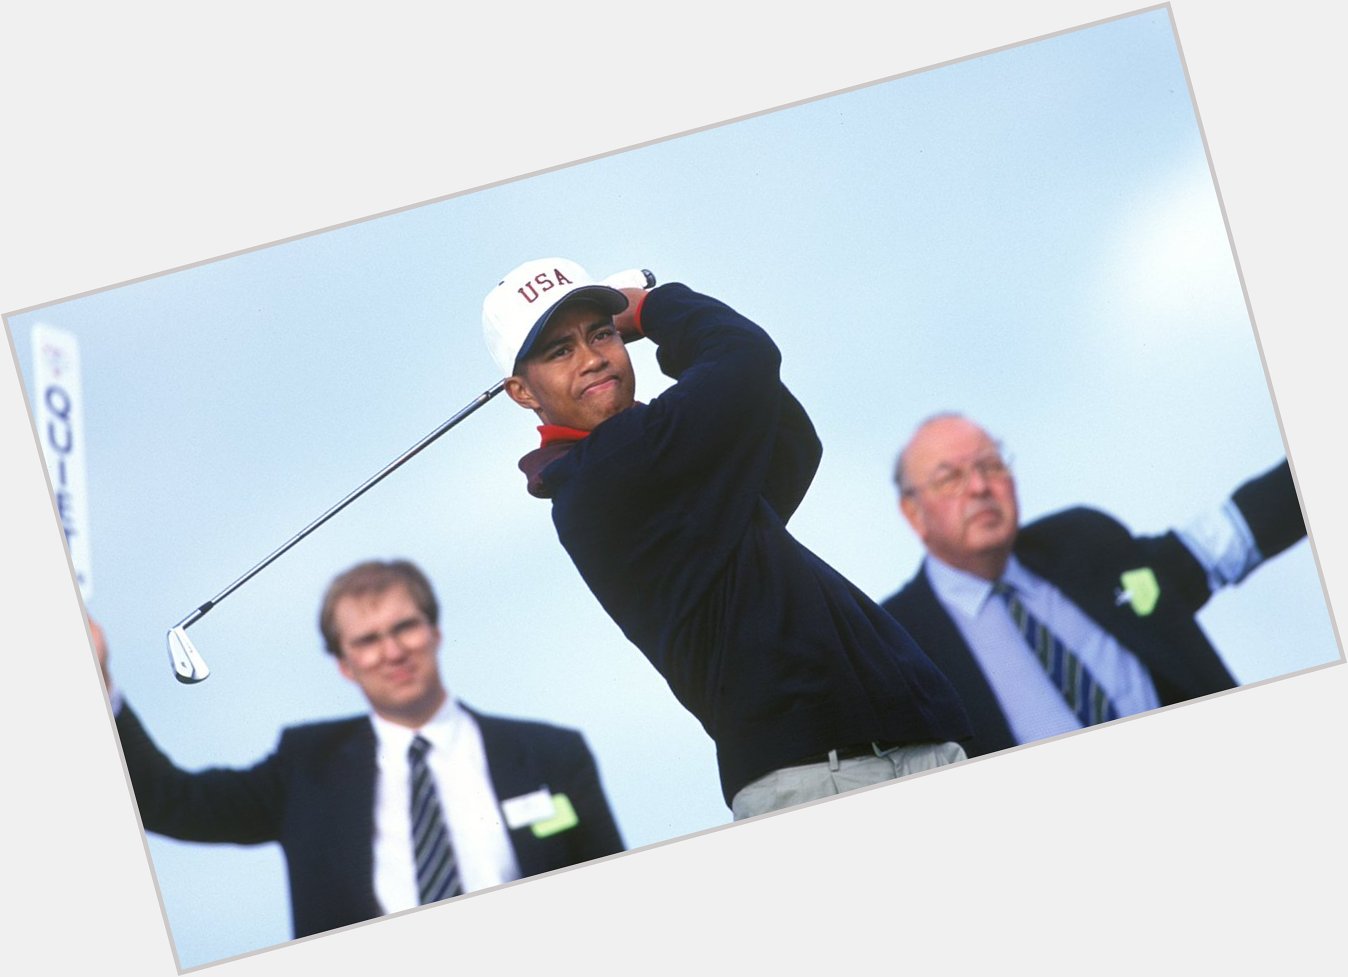 Before 14 major titles, he represented the USA in the 1995 Happy birthday to Tiger Woods! 